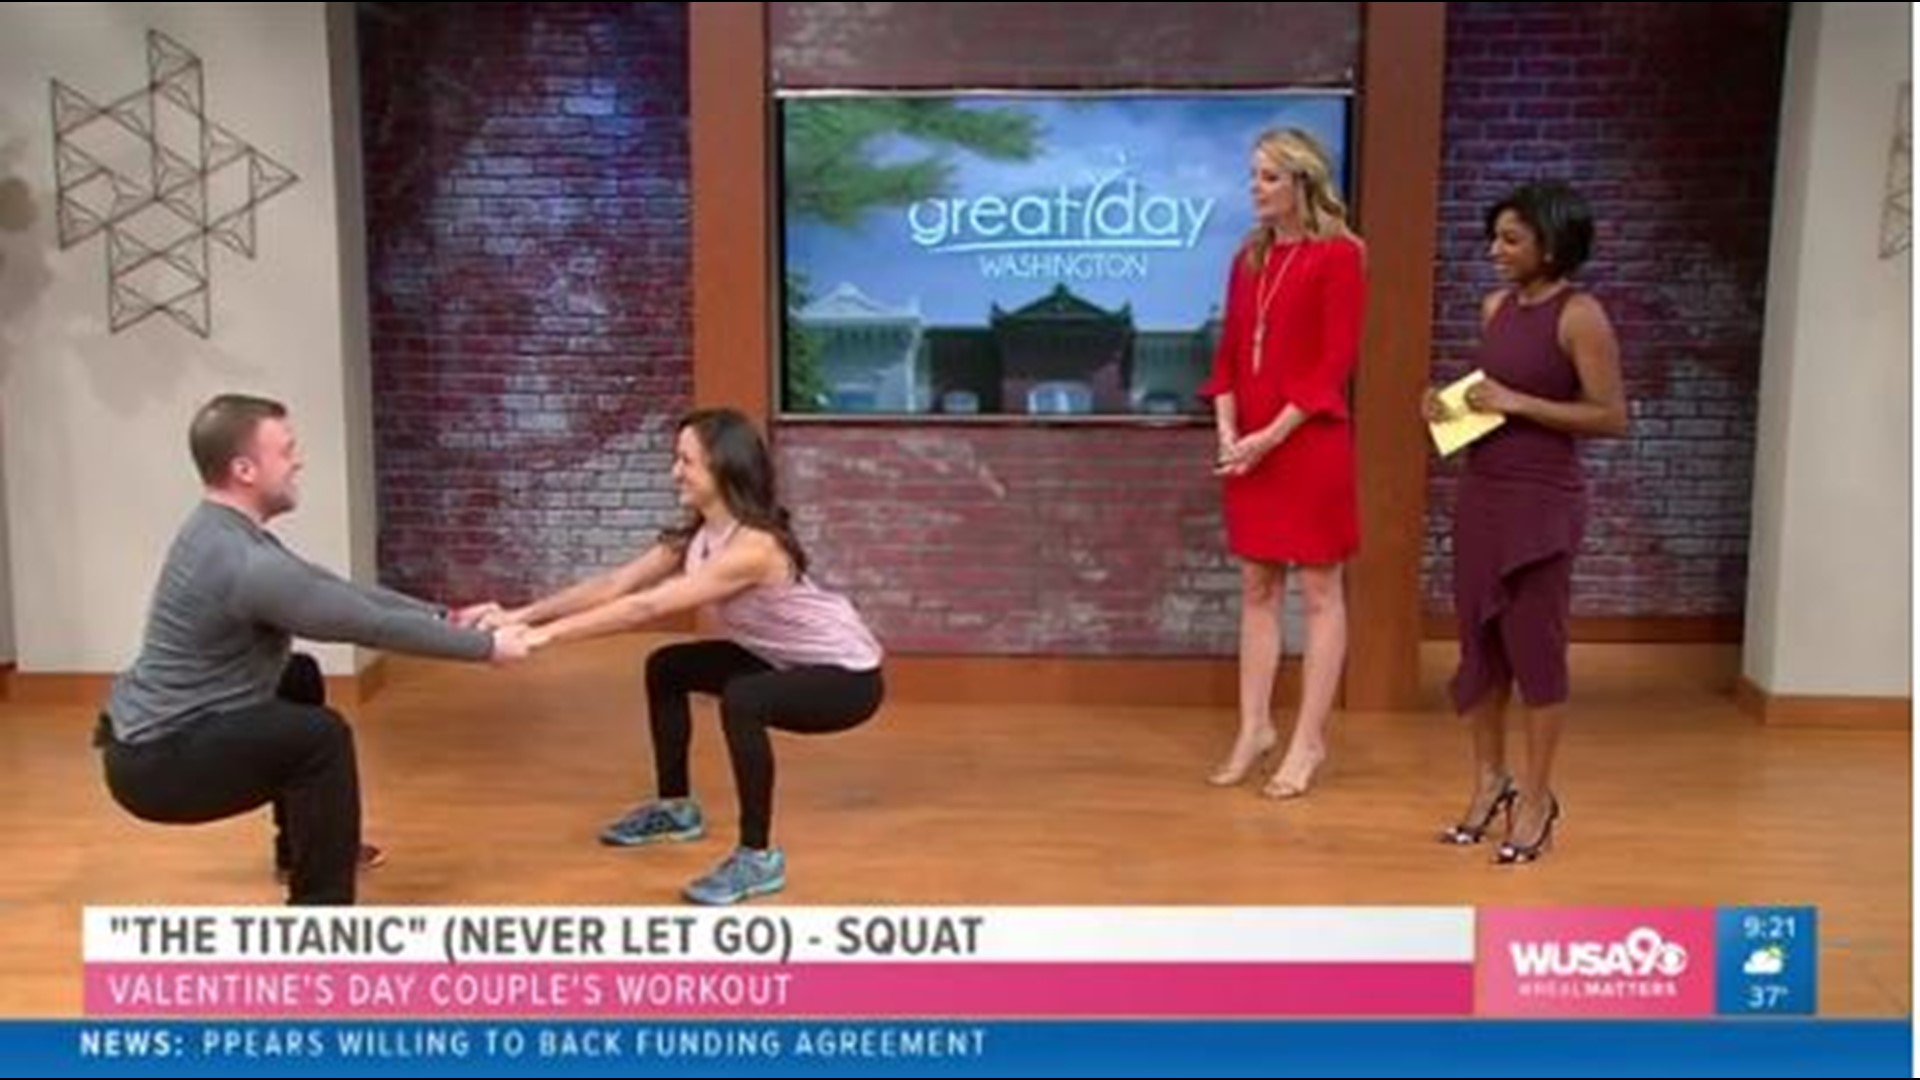 Personal trainers (and newly engaged couple) Kevin Mullins and Whitney Kling have a workout routine for you and your significant other sweat it out together. Kevin is the author of "Day by Day", a daily guide to fitness.